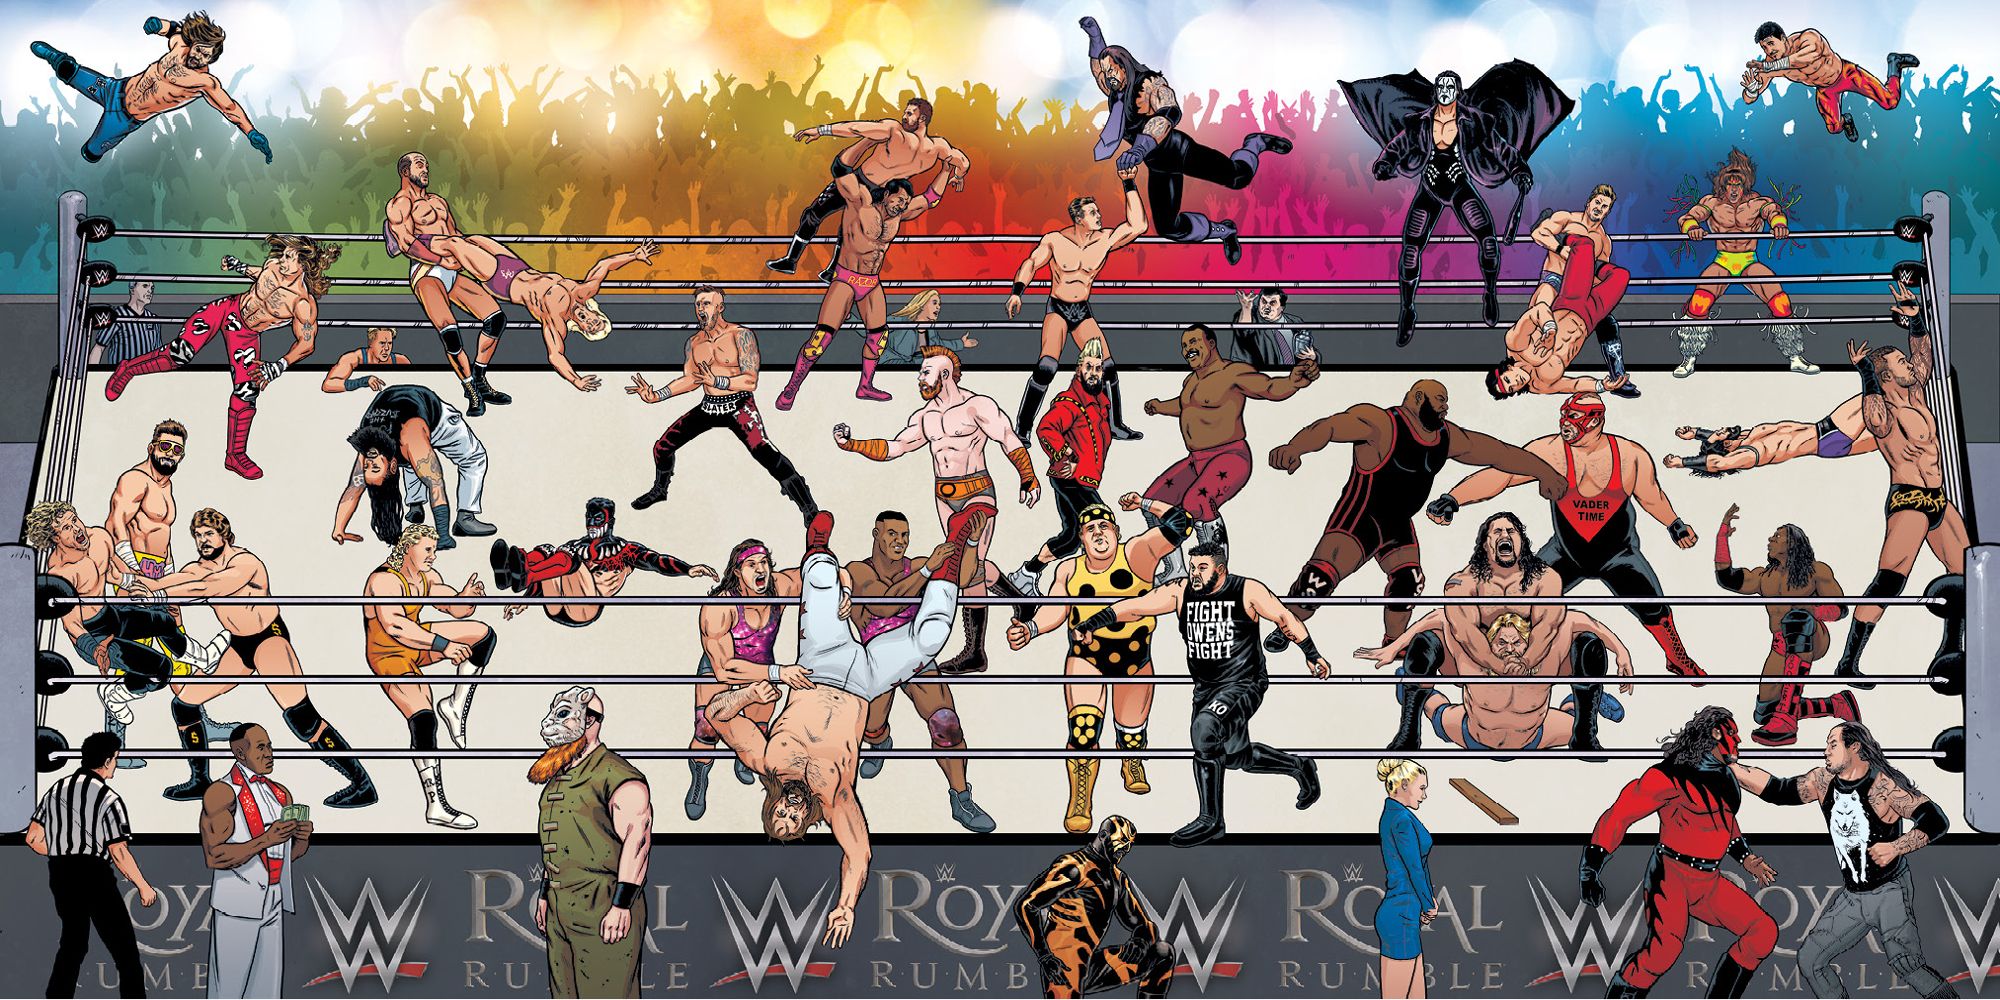 Featured Image: combined wraparound variant covers for WWE's Royal Rumble comic, featuring pro wrestling superstars past & present